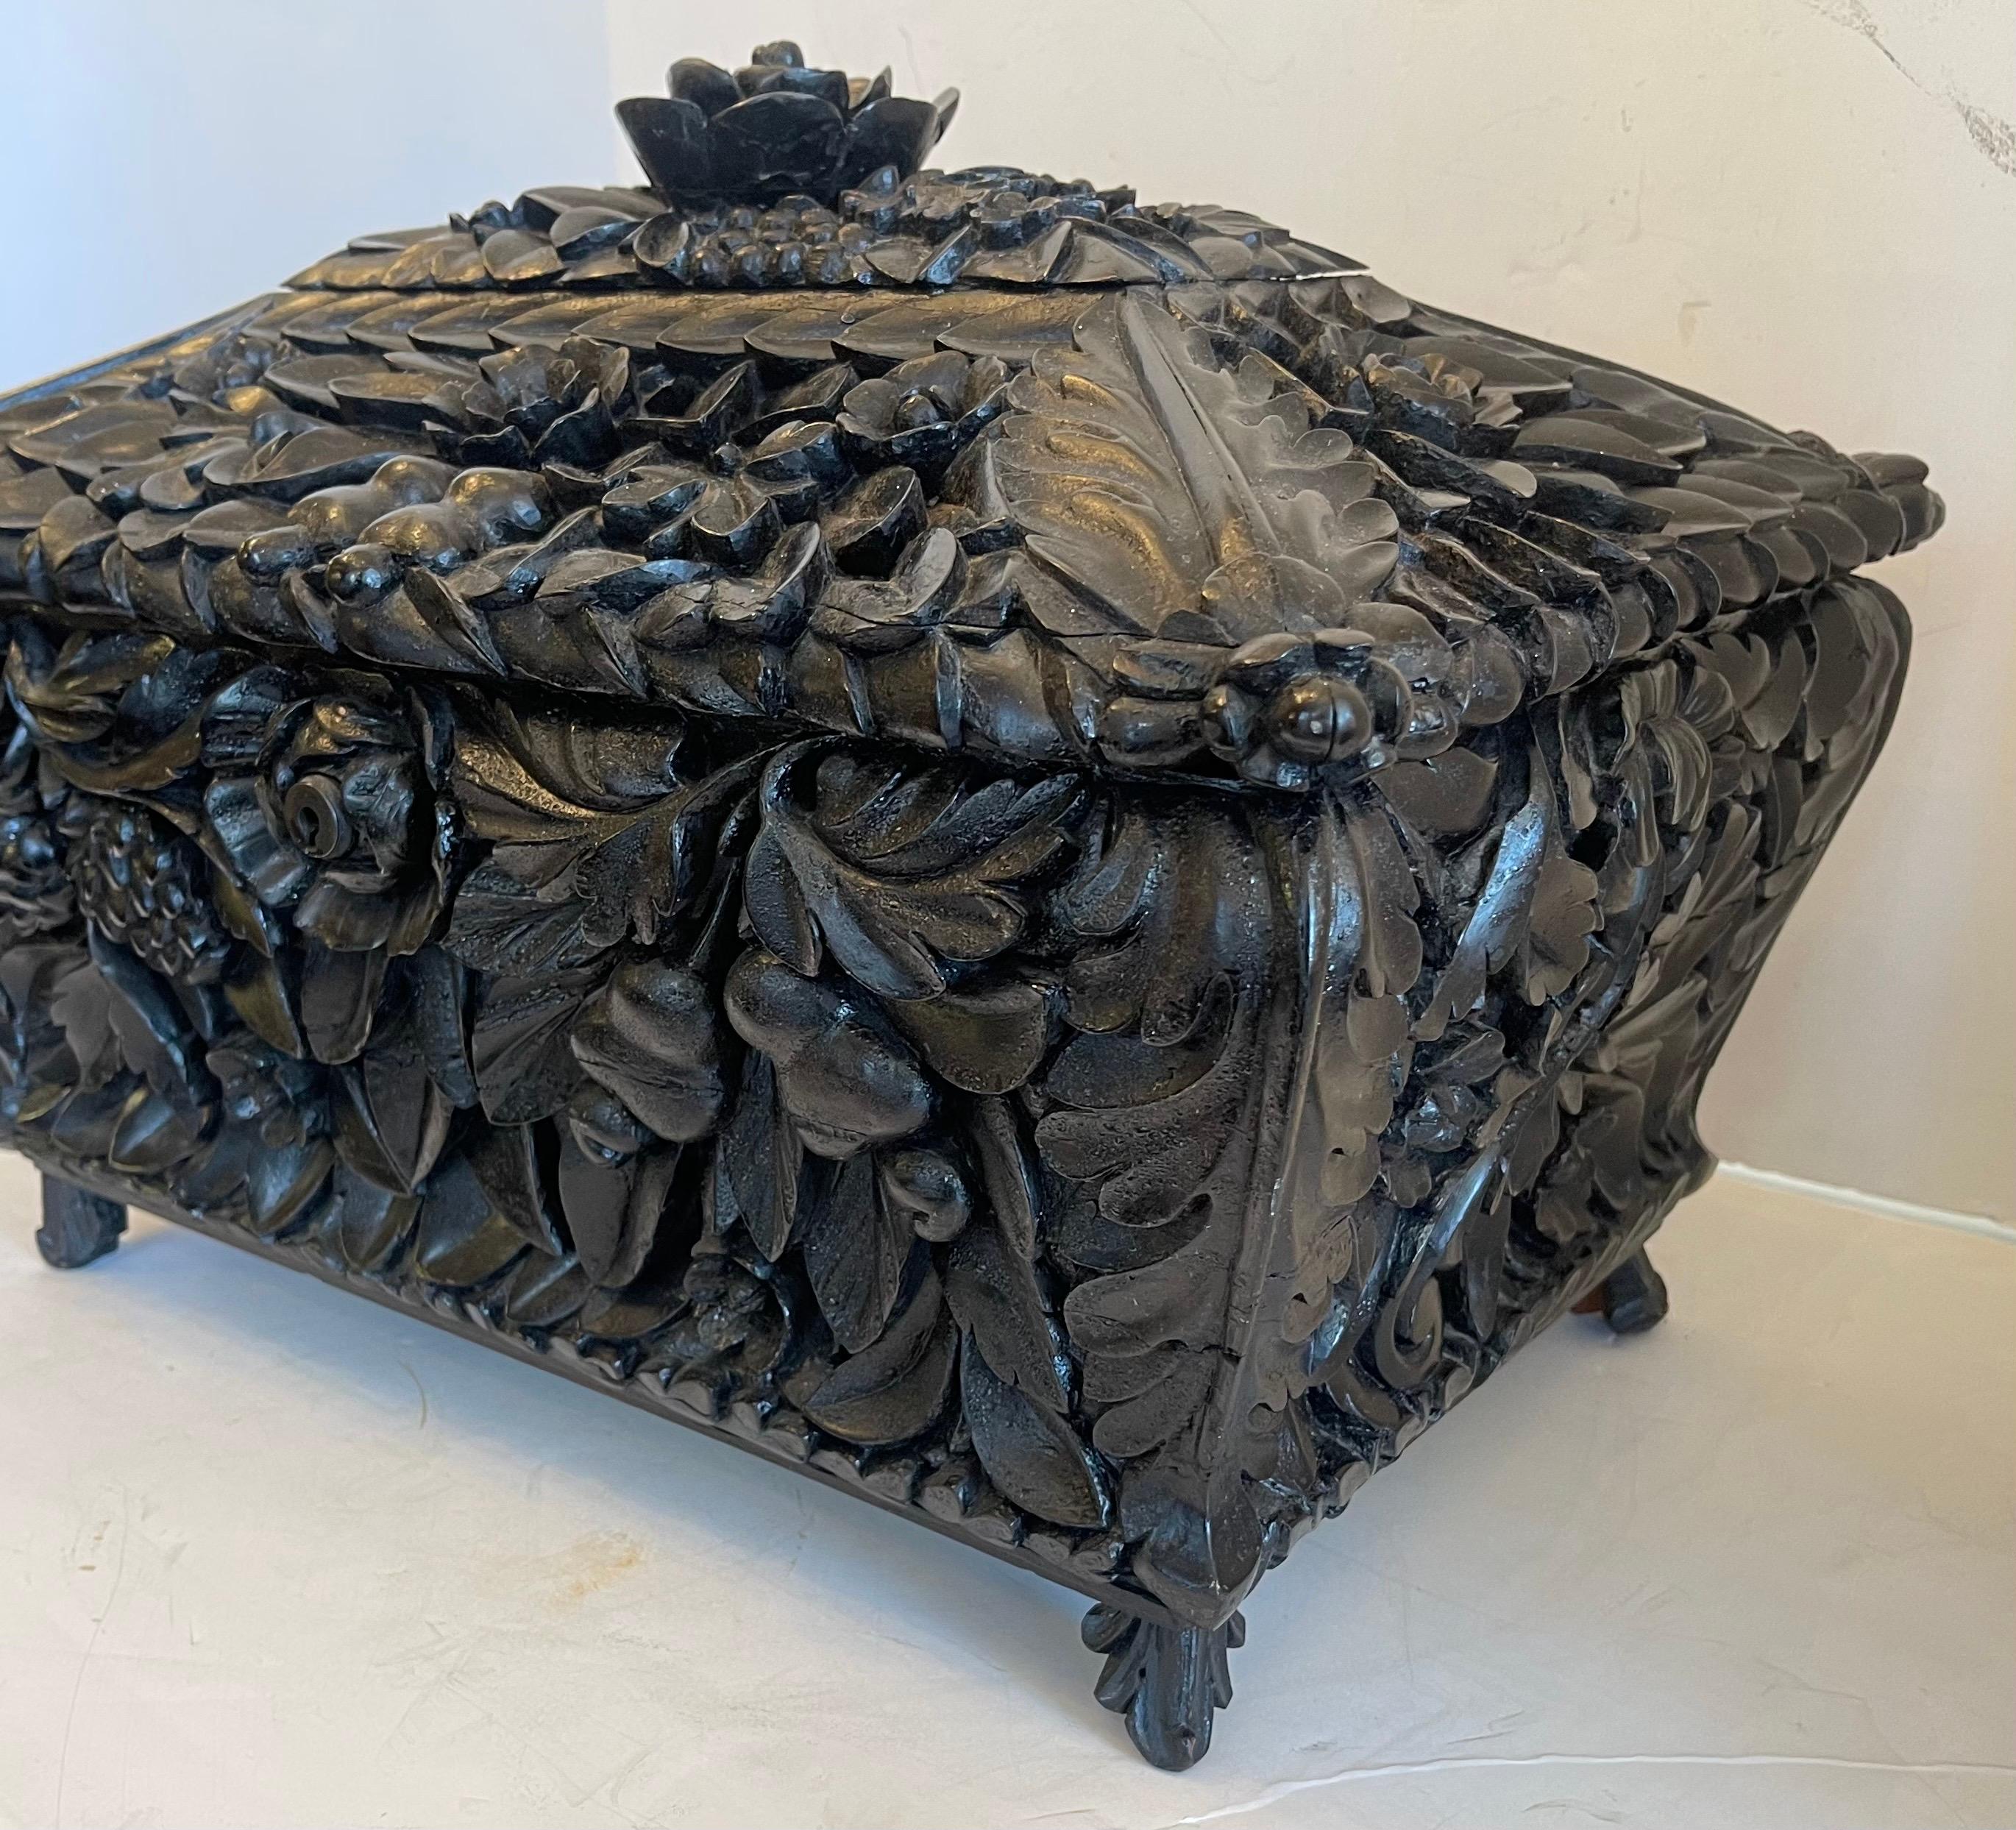 A Beautifully Hand-Carved 19th Century Esthetic / Black Forest Walnut Rare Humidor Box.